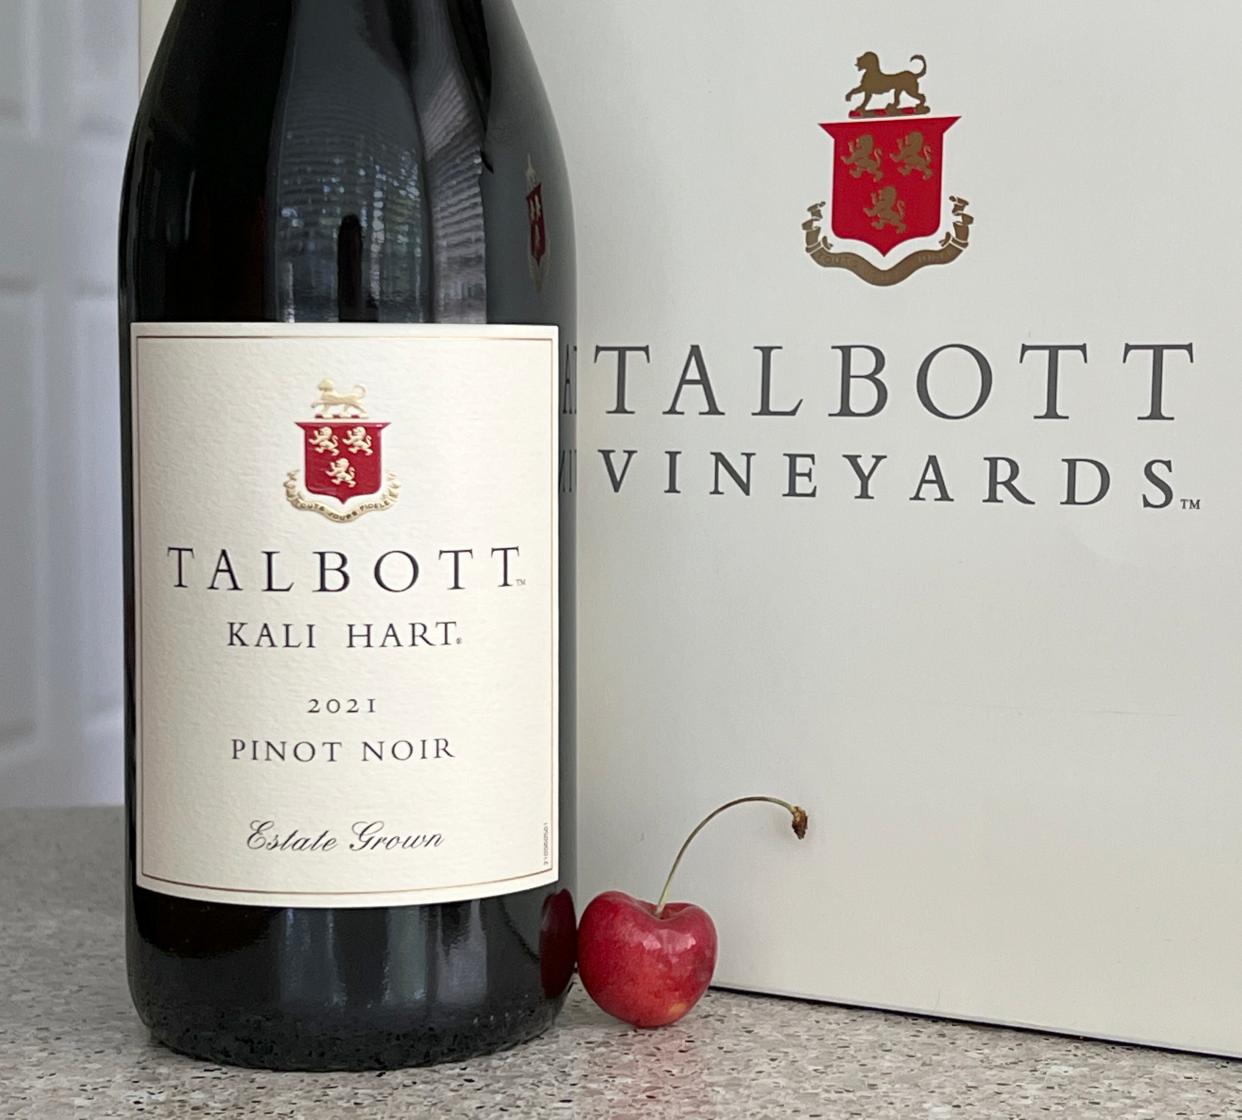 Consider Talbott Kali Har pinot noir from Monterey, California, Phil Masturzo's gift to you, dear readers, from his recent trip to wine country.